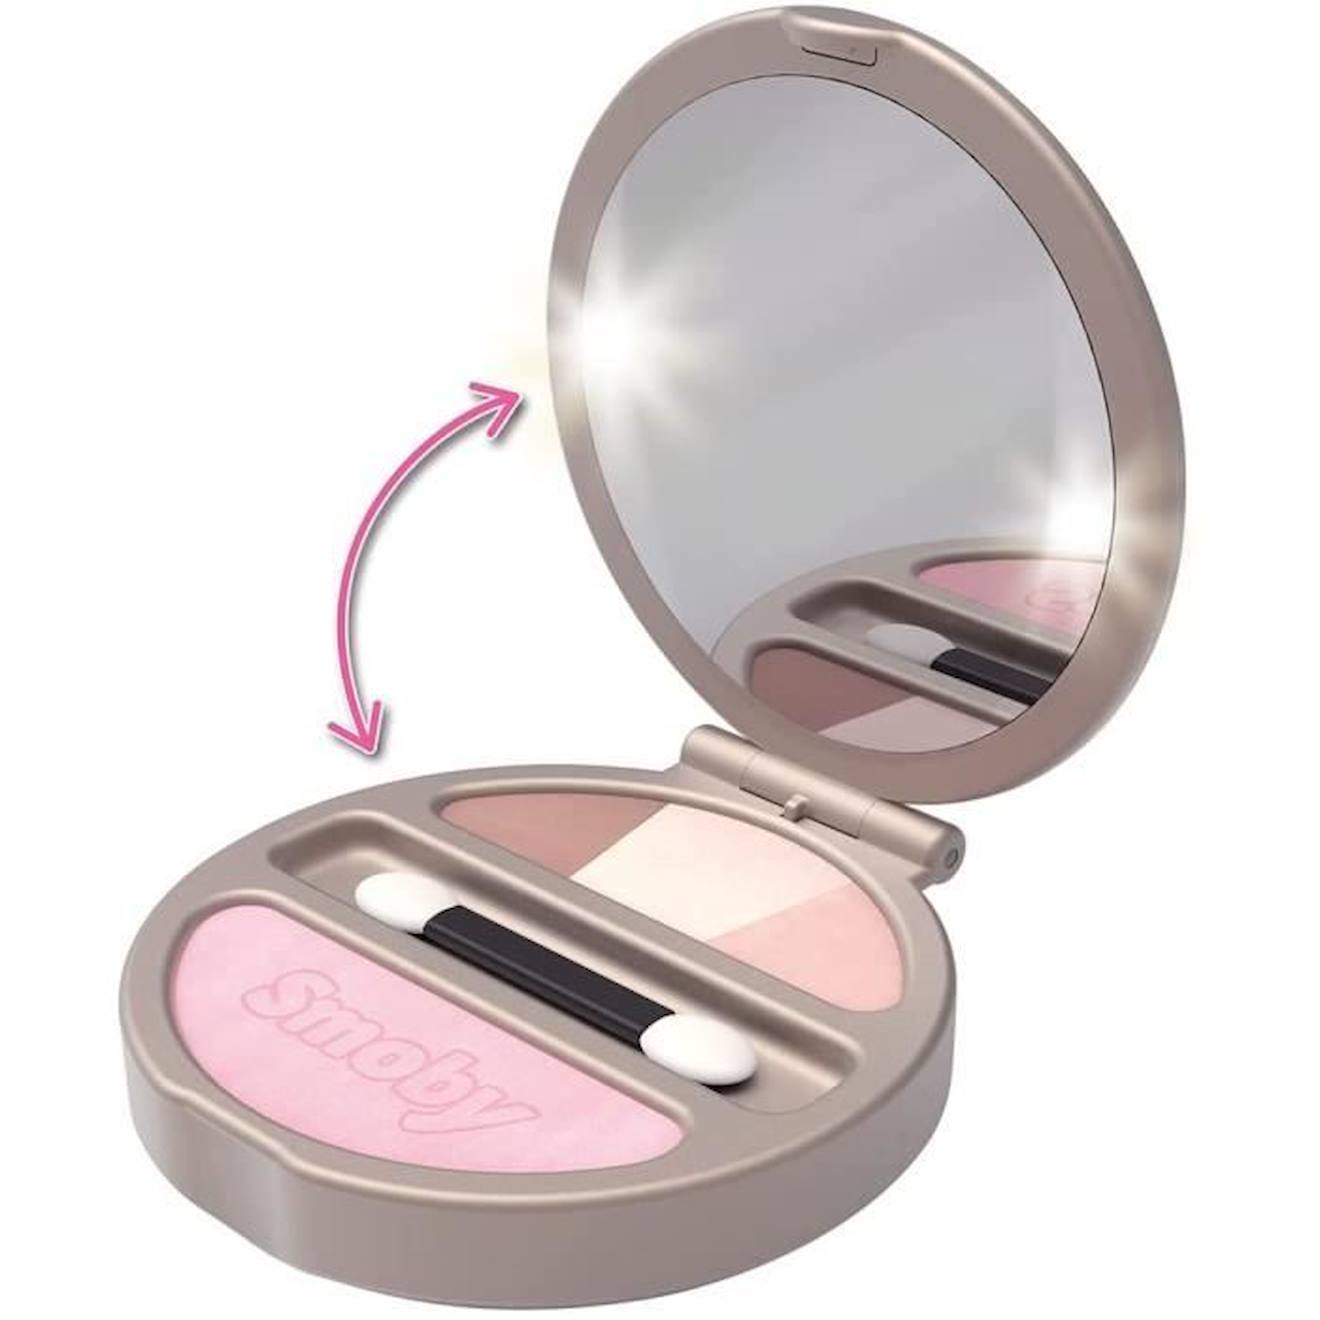 Smoby - My Beauty Powder Compact - Poudrier Factice Lumineux - Miroir - 320151 Gris